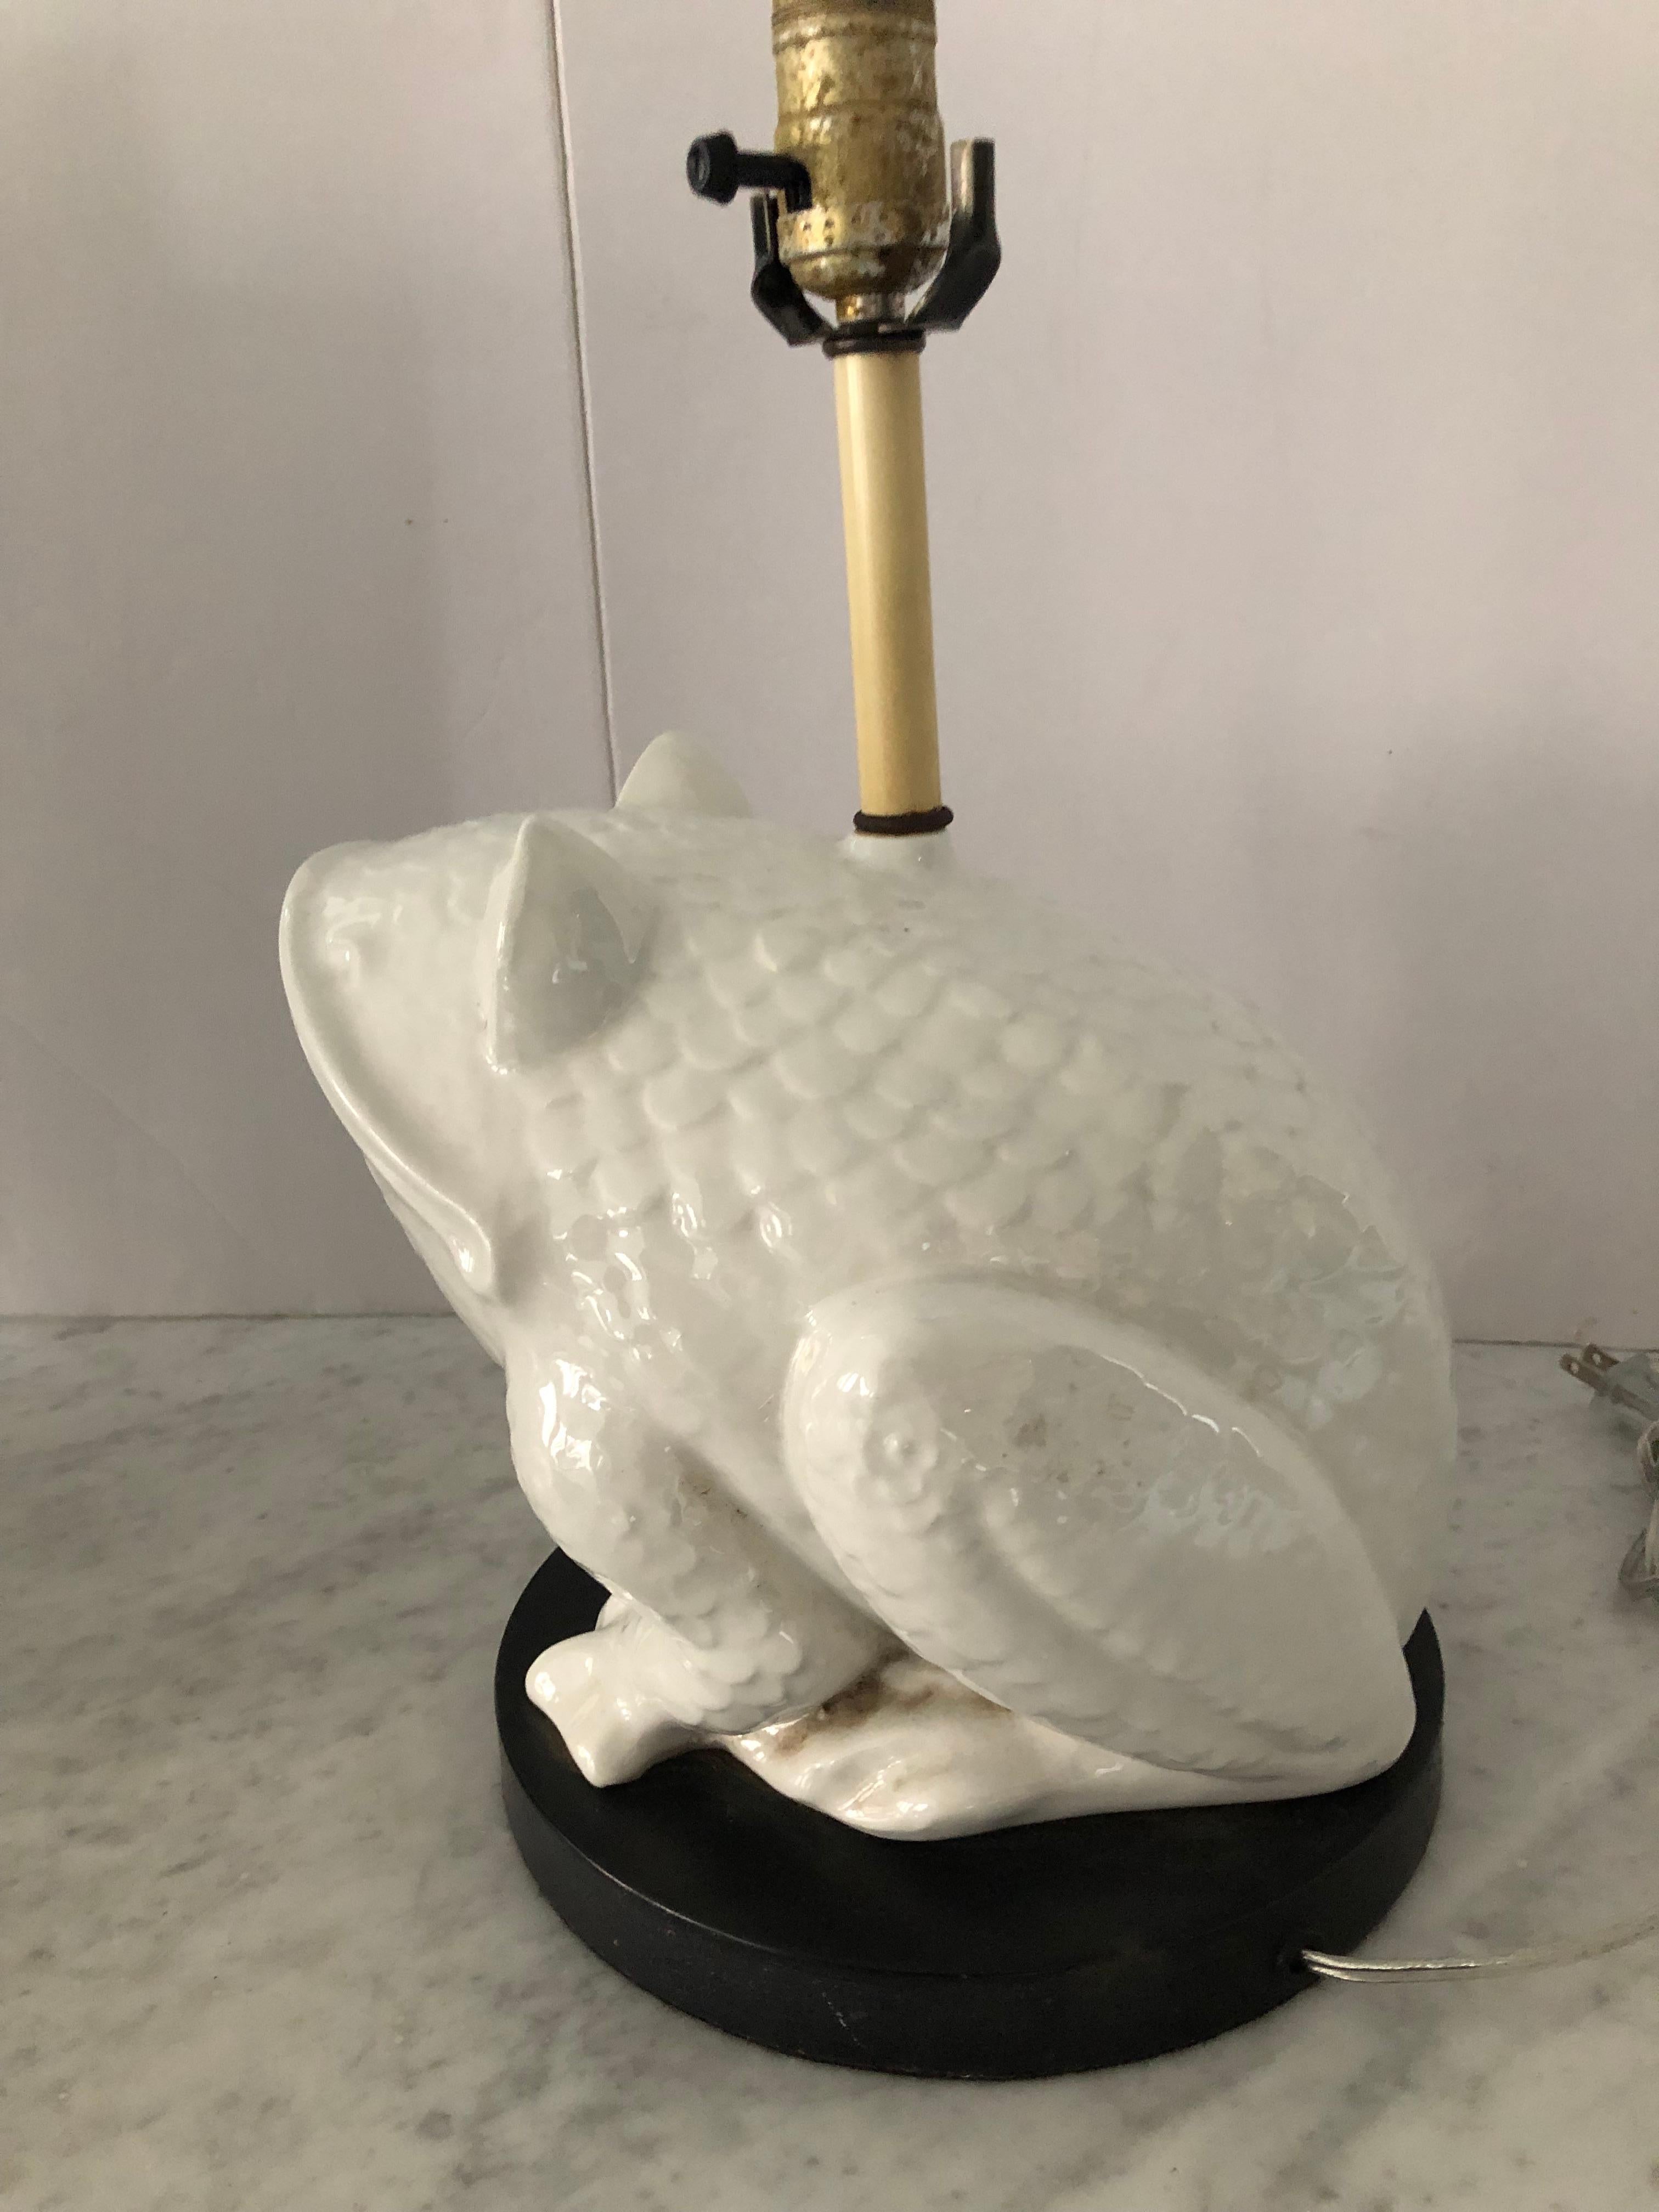 Midcentury ceramic frog table lamp on a black circular base, probably from Italy. The face has great personality! Shade not included.